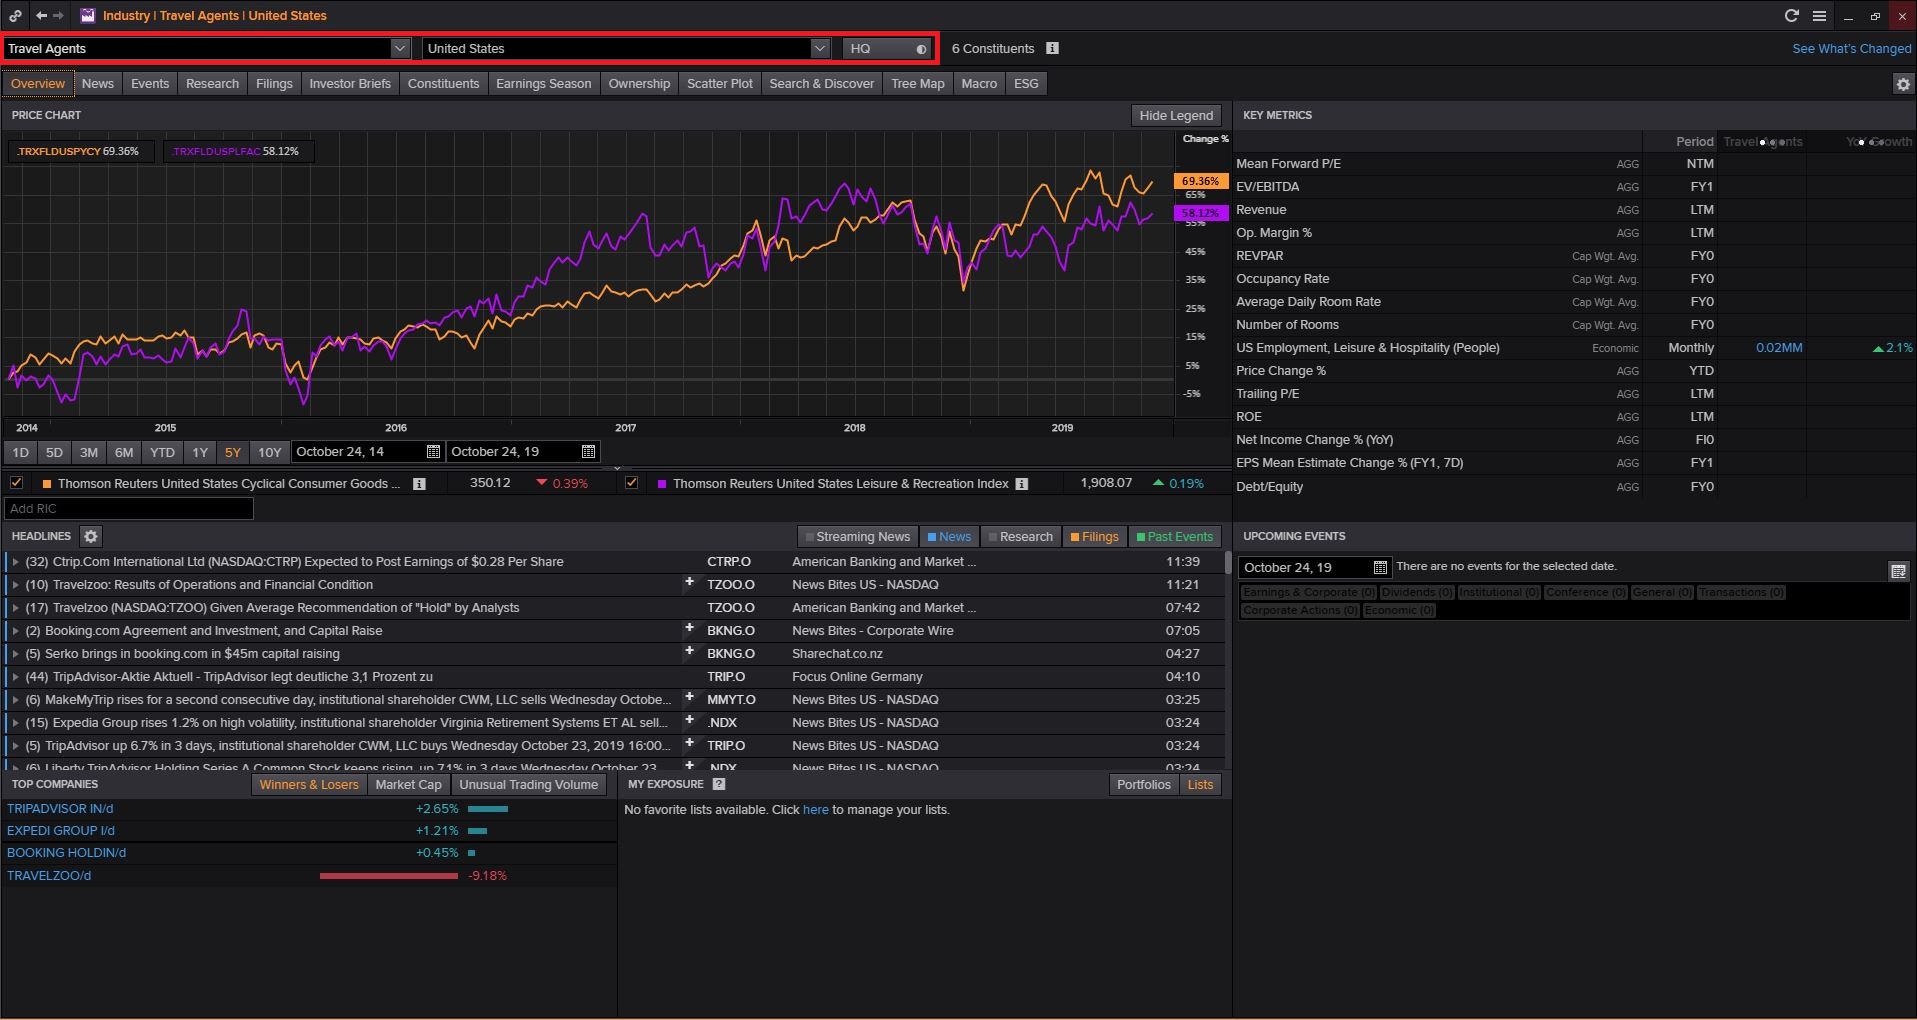 Login to Thomson Reuters Eikon (Available Only in Library) then Type INDUS and Search and Select Consumer Cyclicals and Select Cyclical Consumer Services and Click on Hotels & Entertainment Services and Select Travel Agents